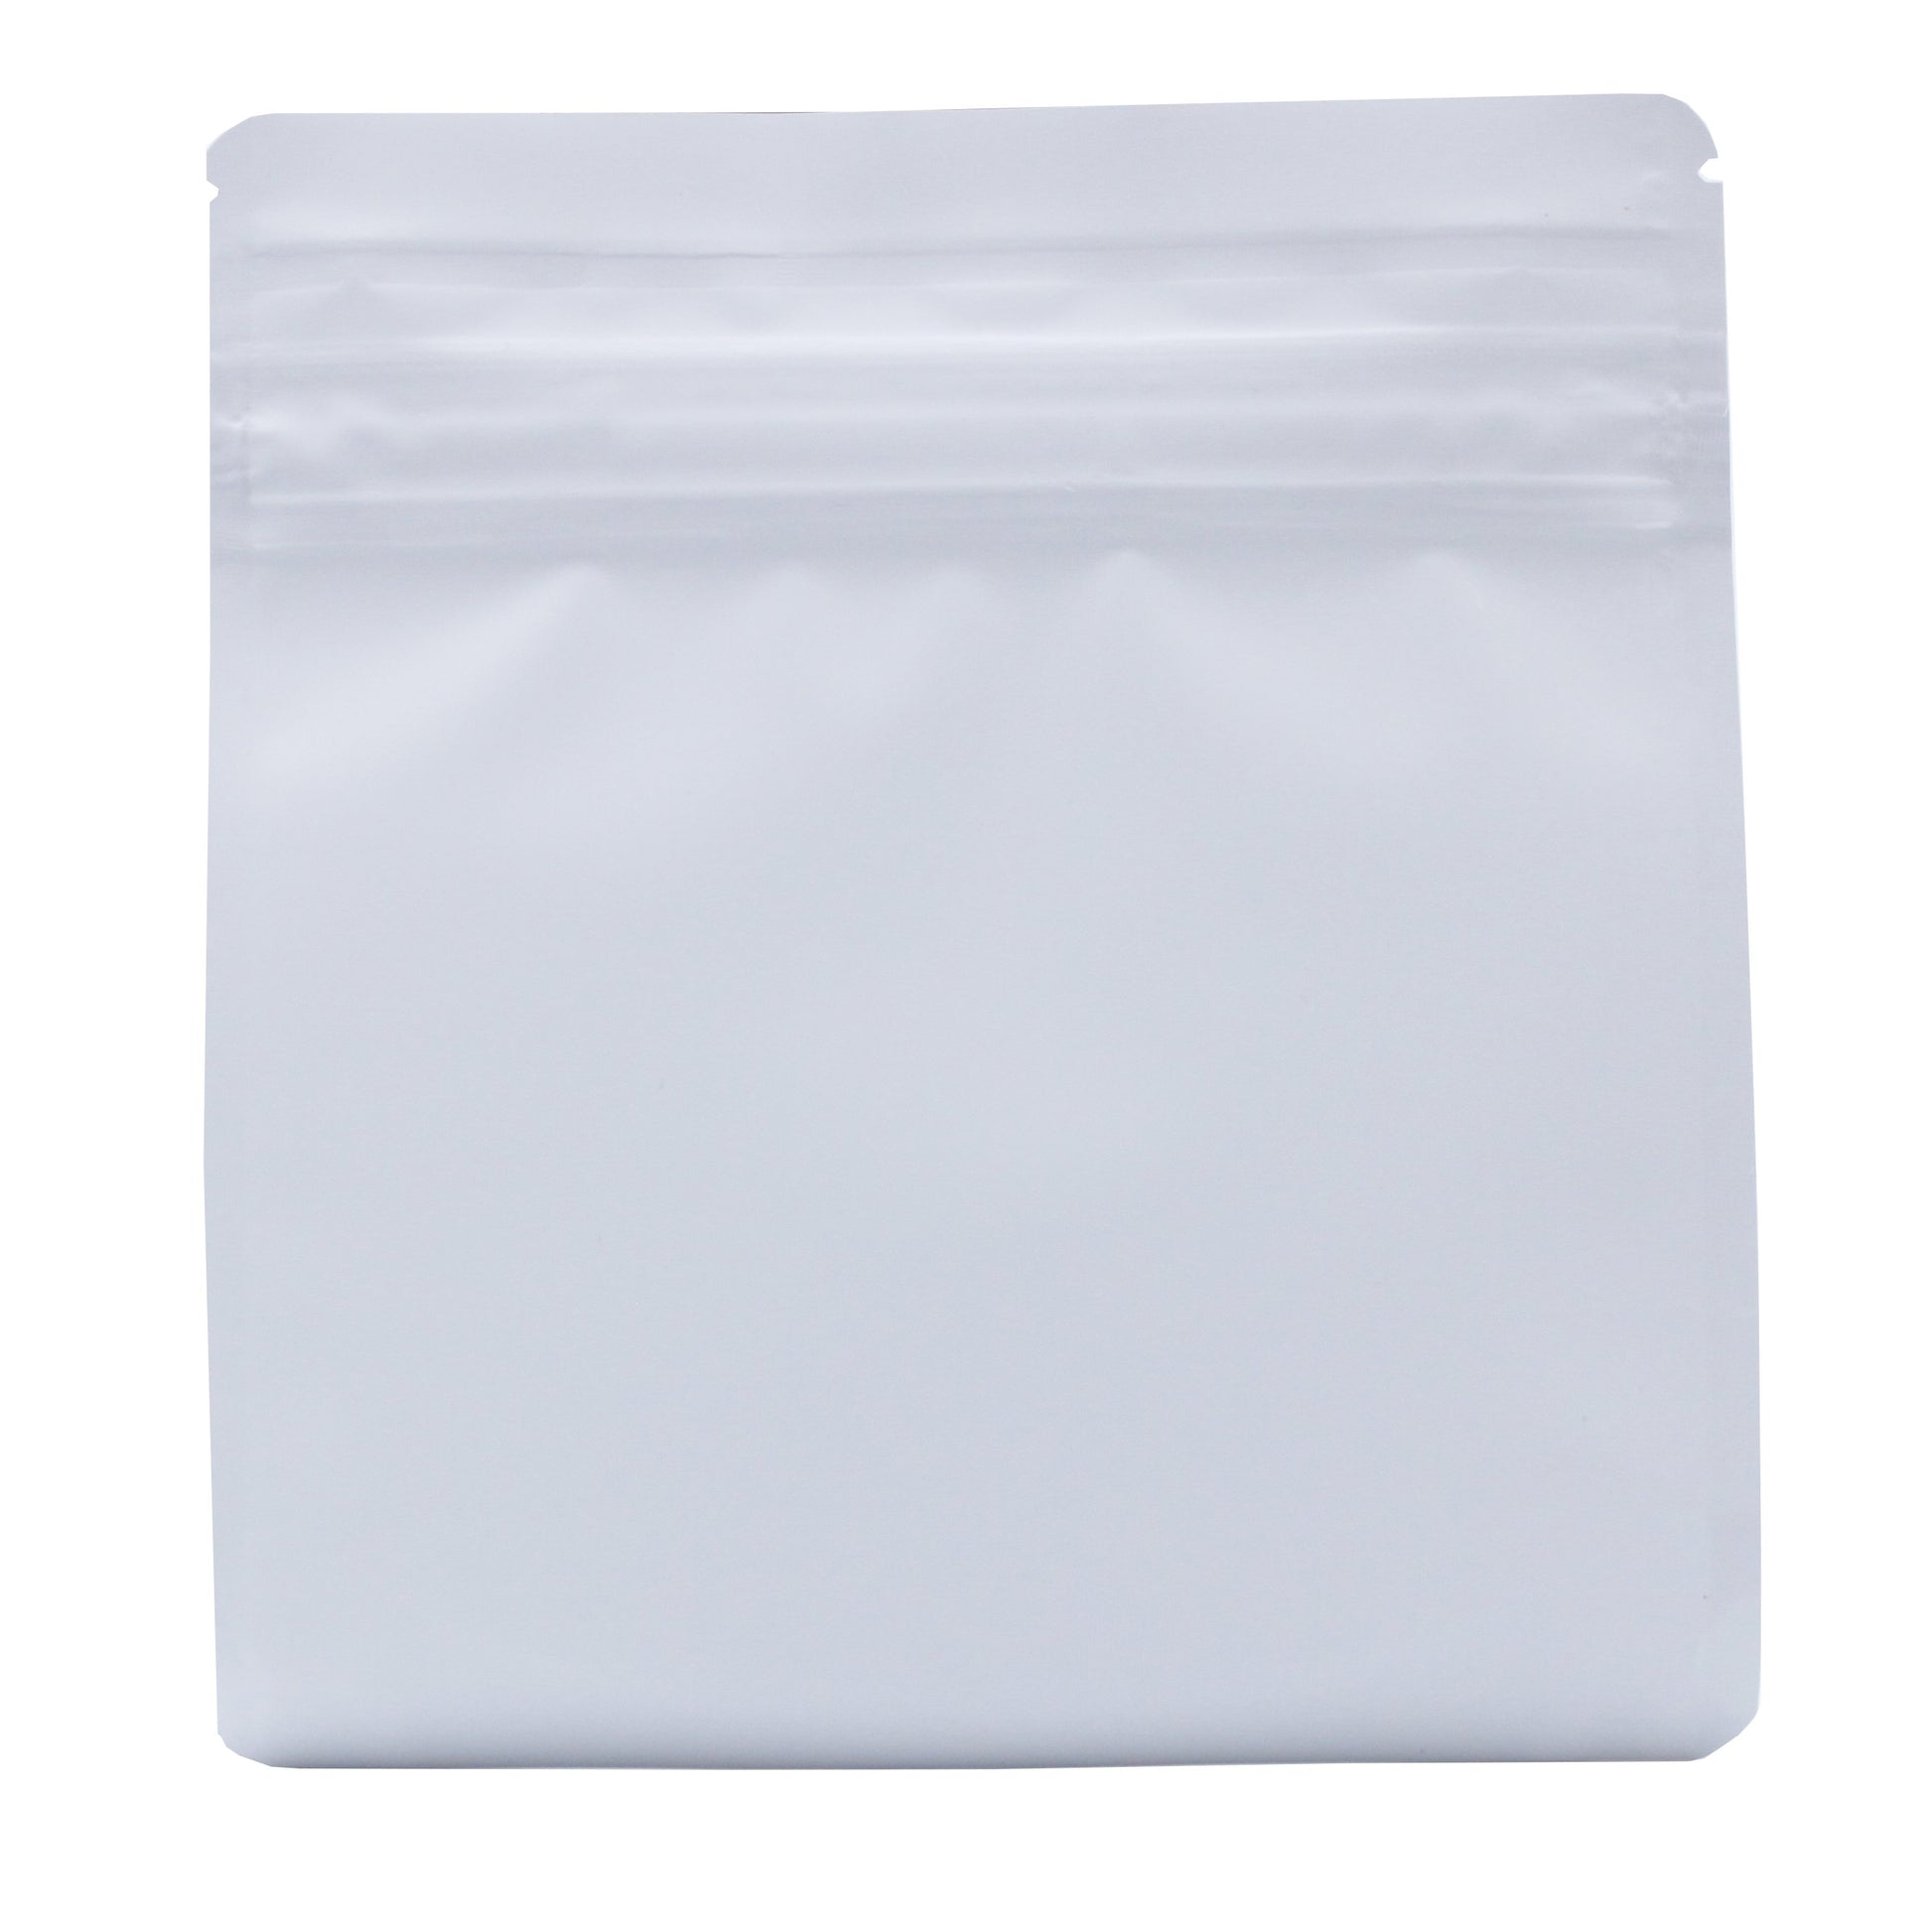 Bag King Child-Resistant Opaque Wide Mouth Bag (1/2 oz) 6.2" x 6.9" Matte White